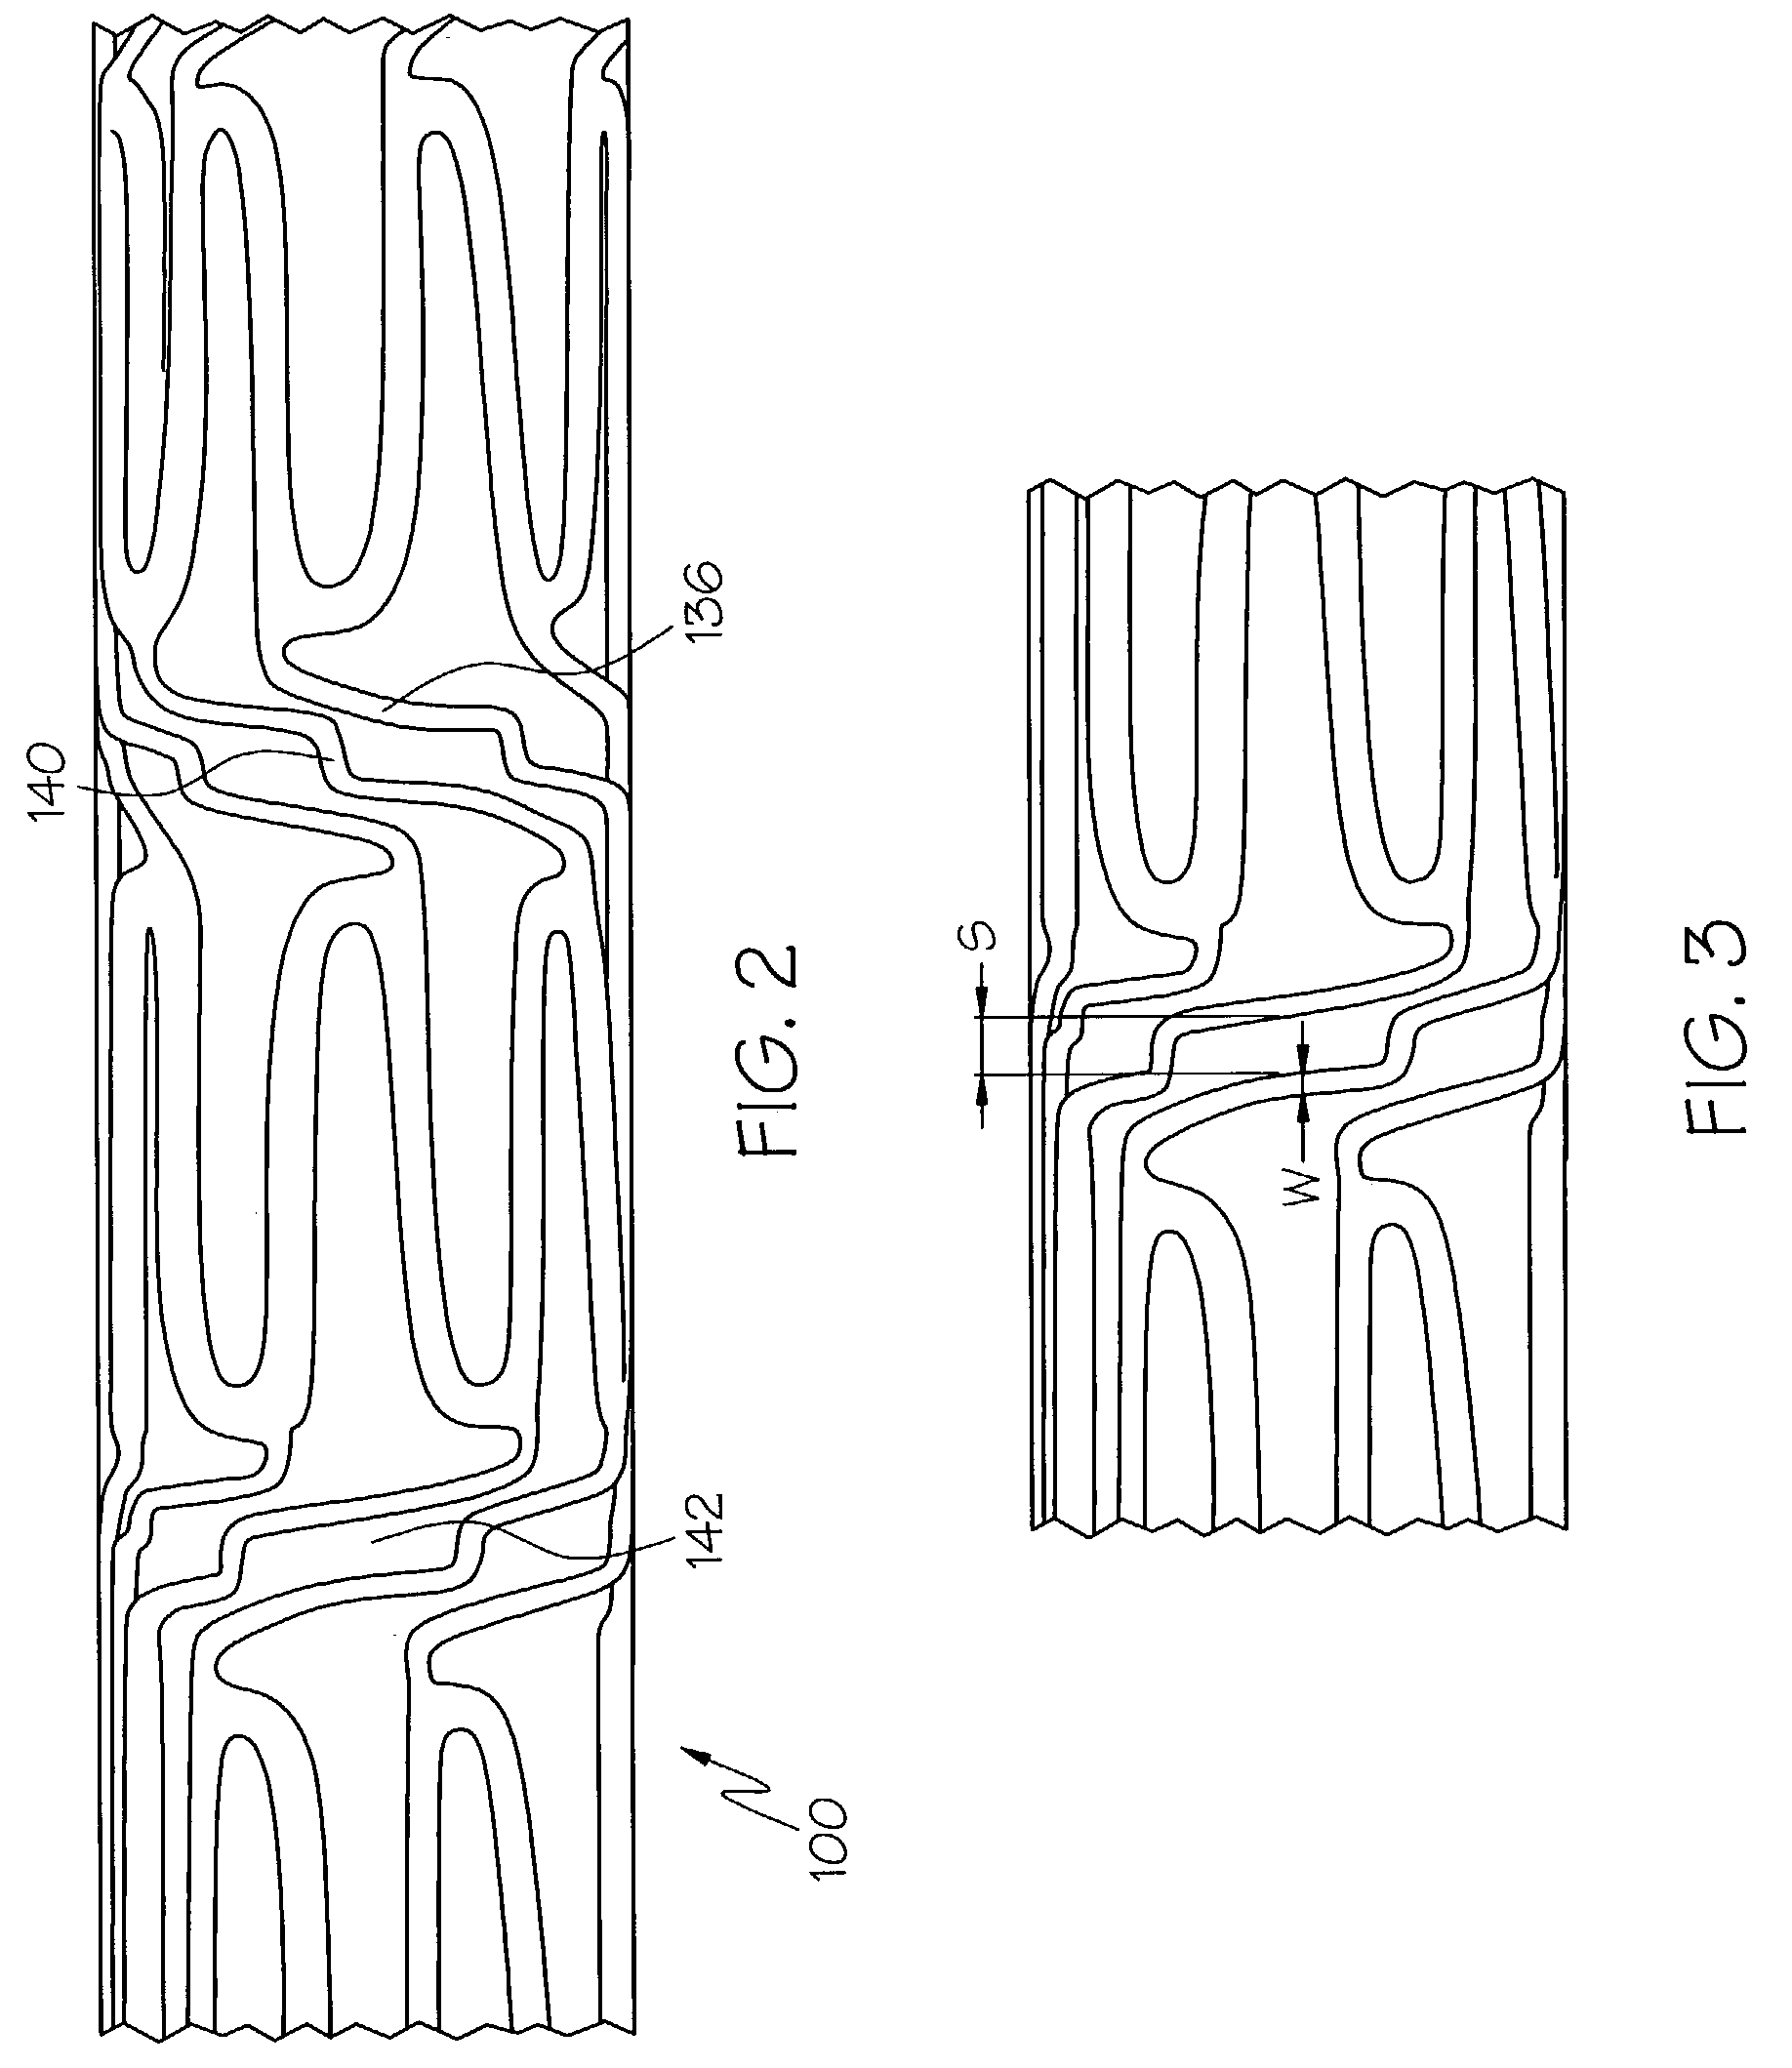 Stent with stepped connectors